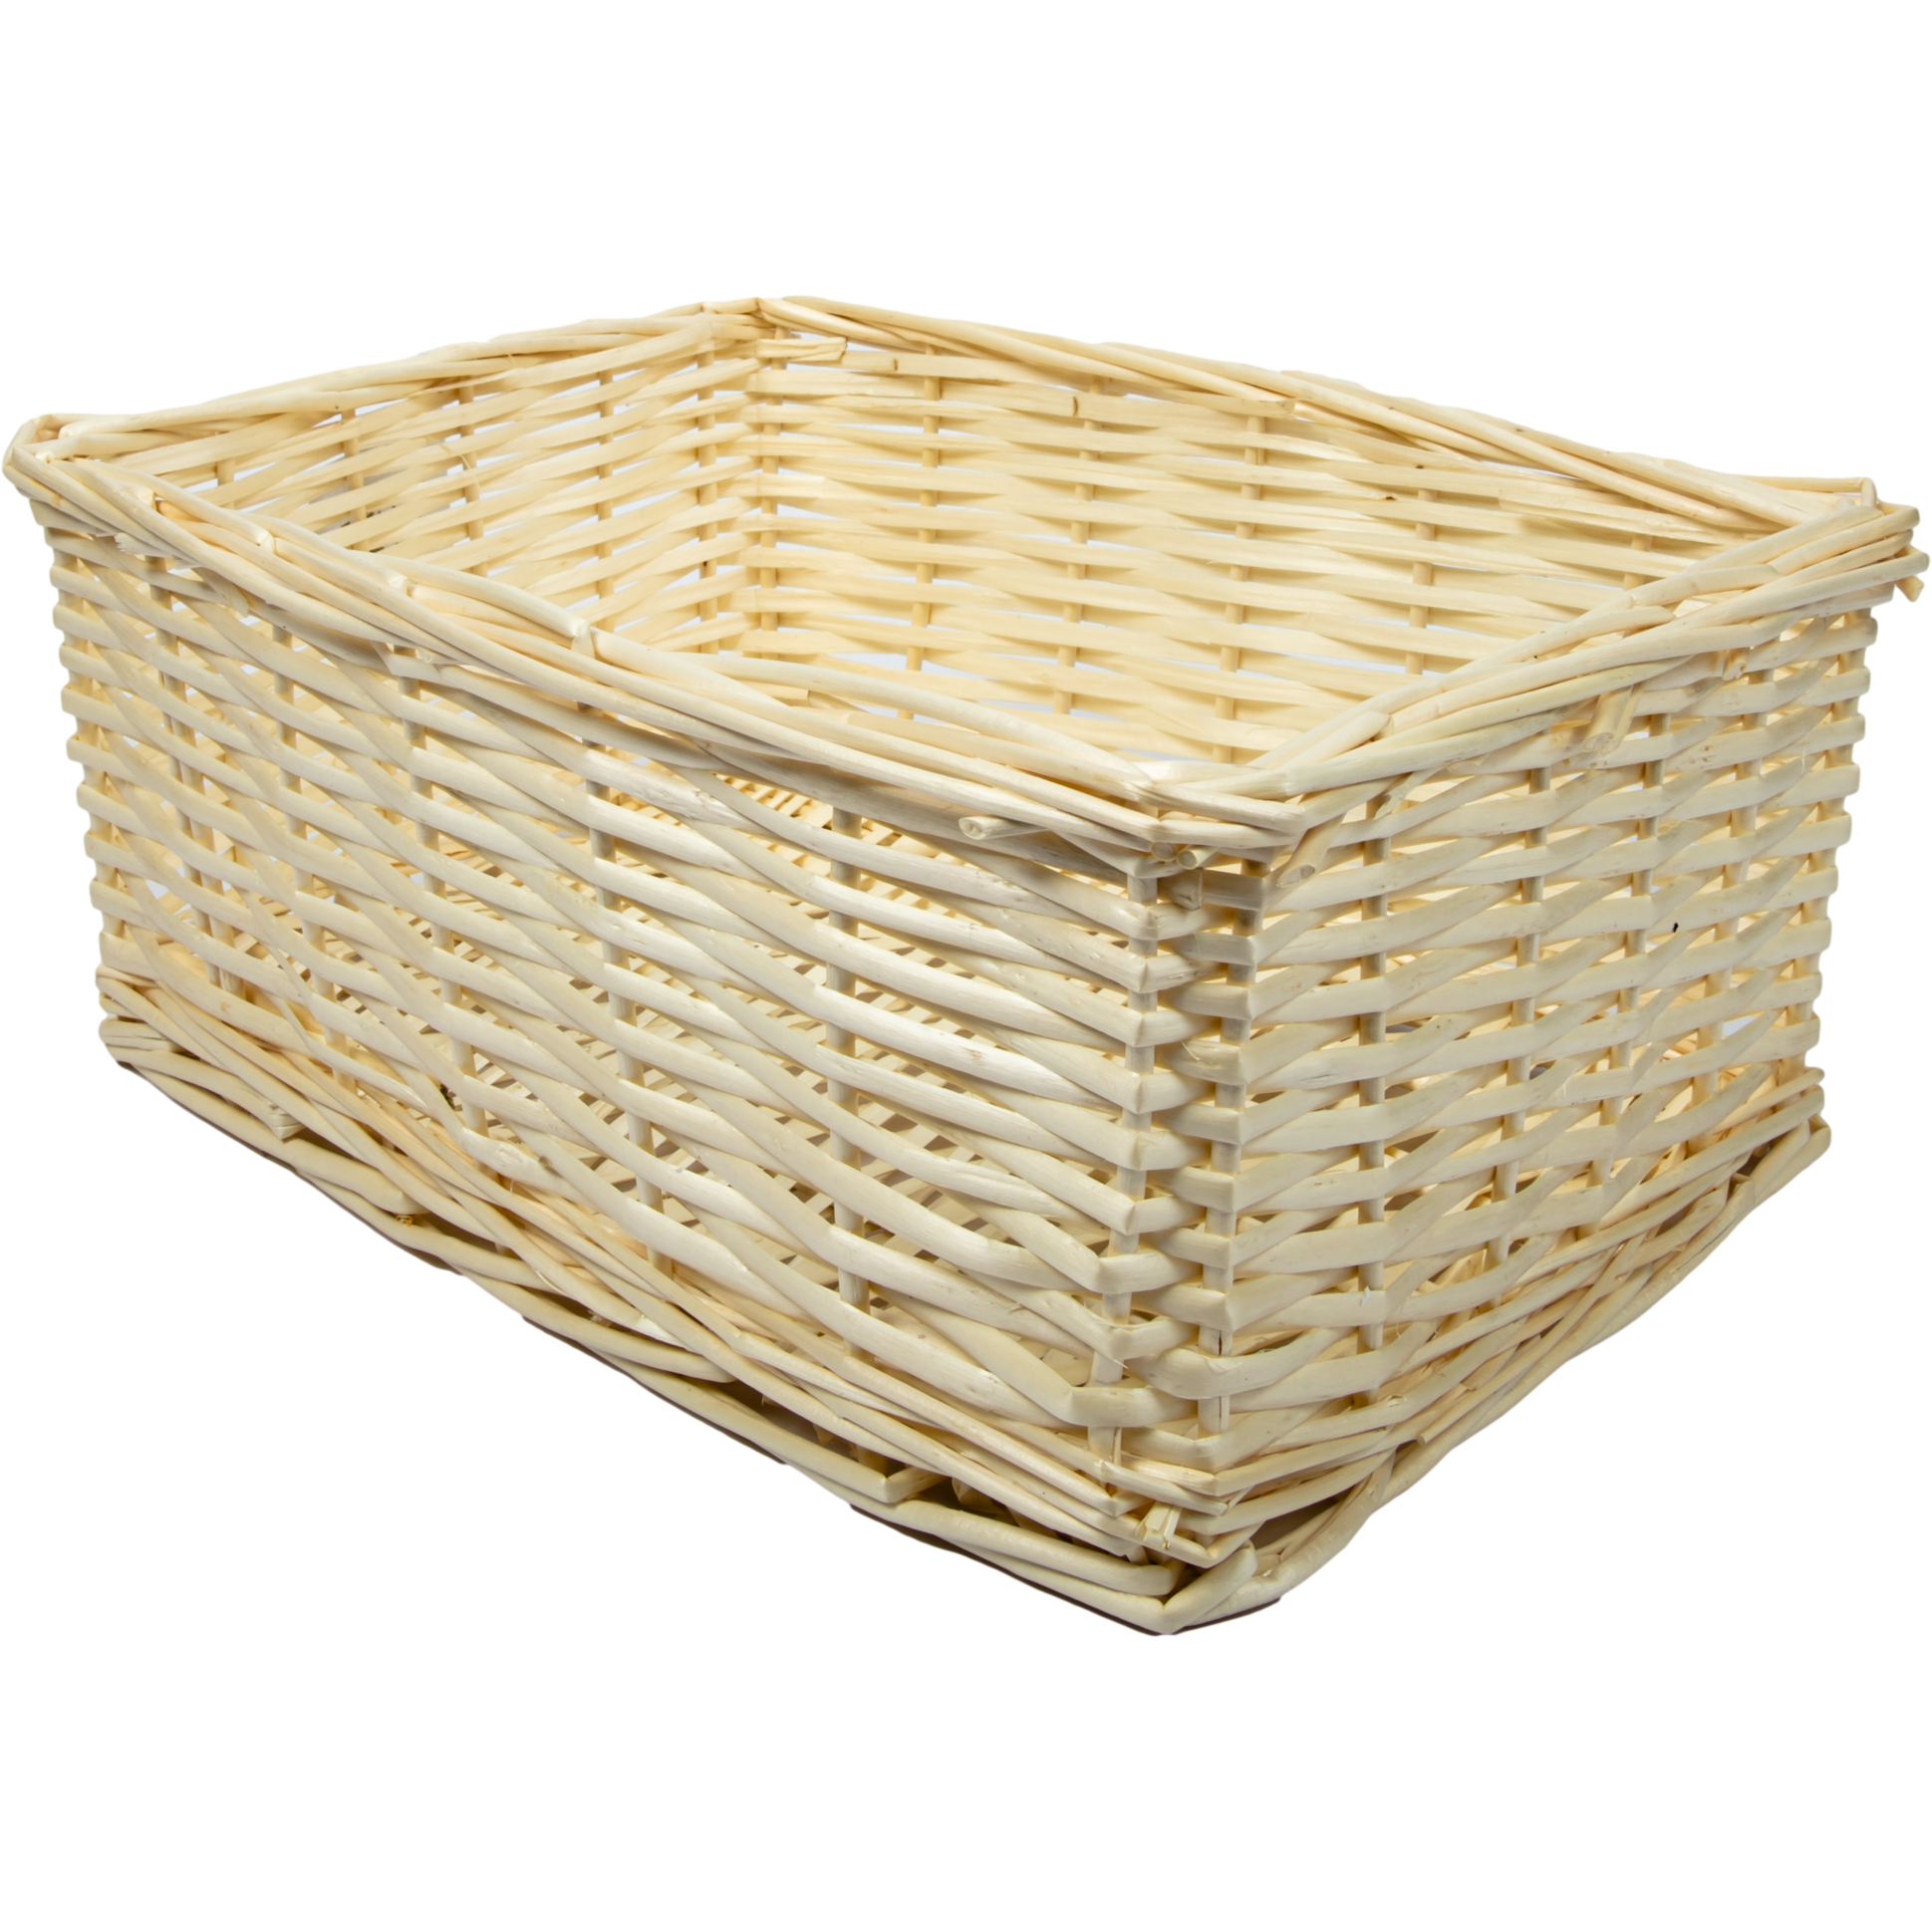 Image of Urban Crafter Bleached Split Willow Square Basket Small 26 x 16 x 10cm